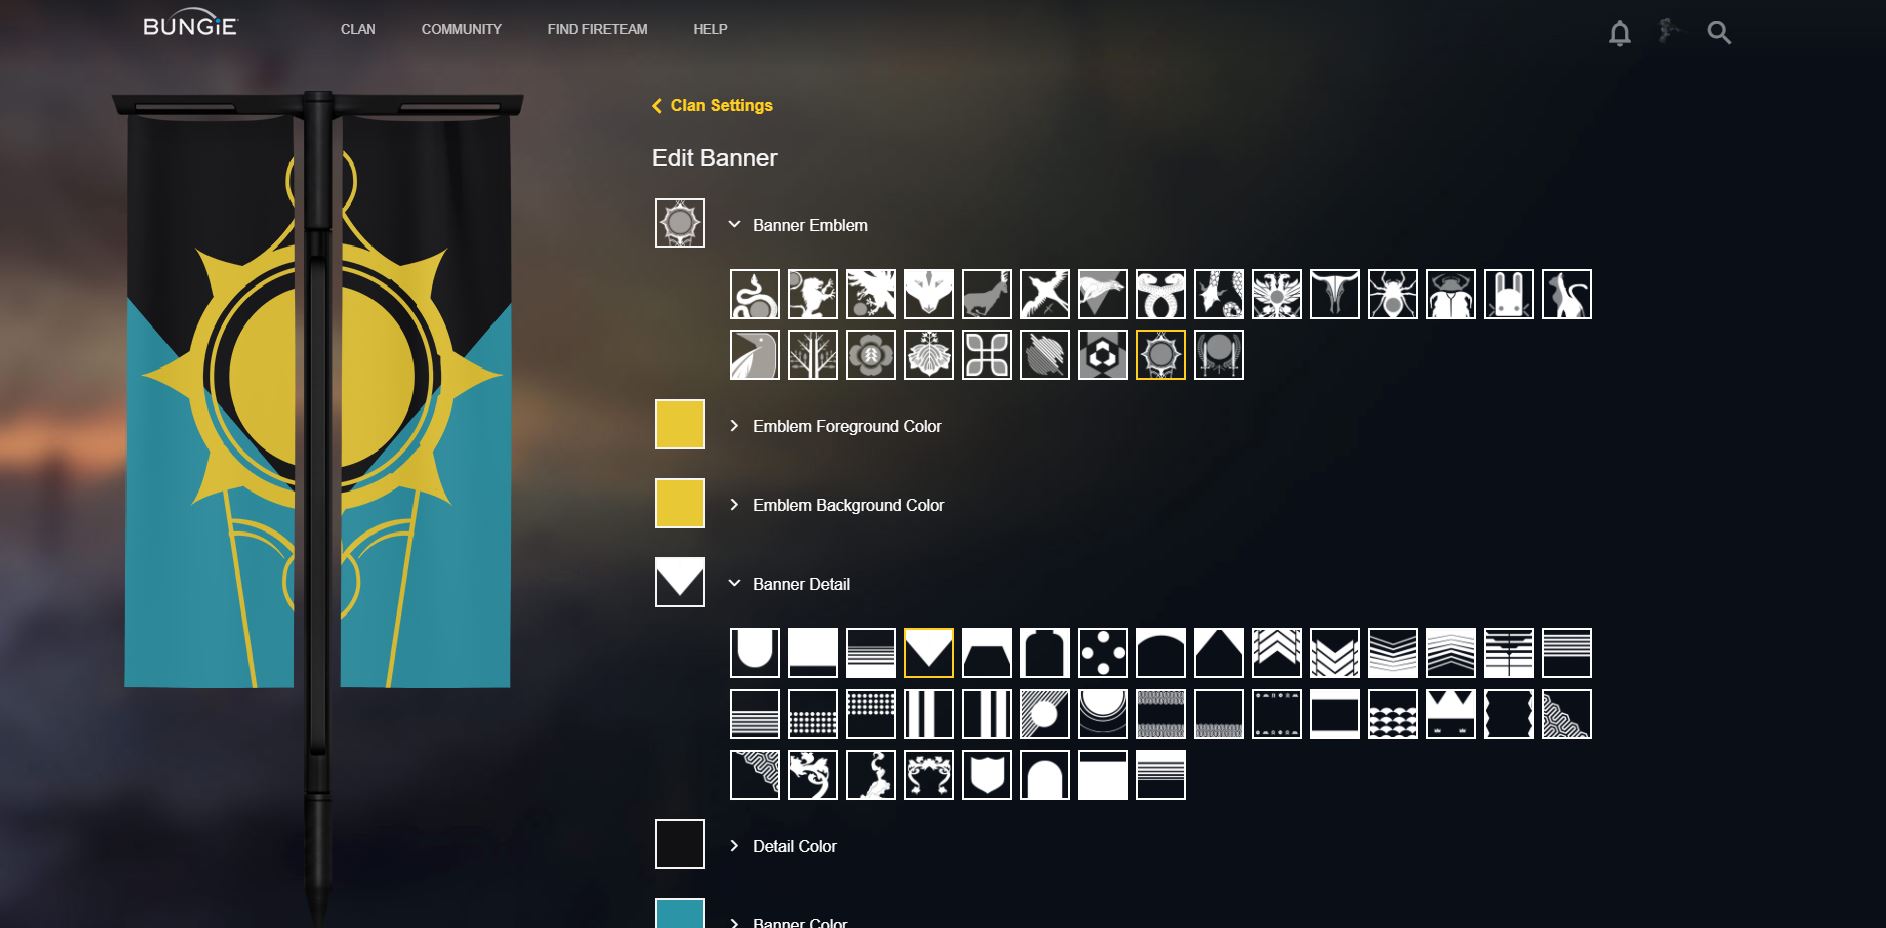 Cool destiny 2 clan banners